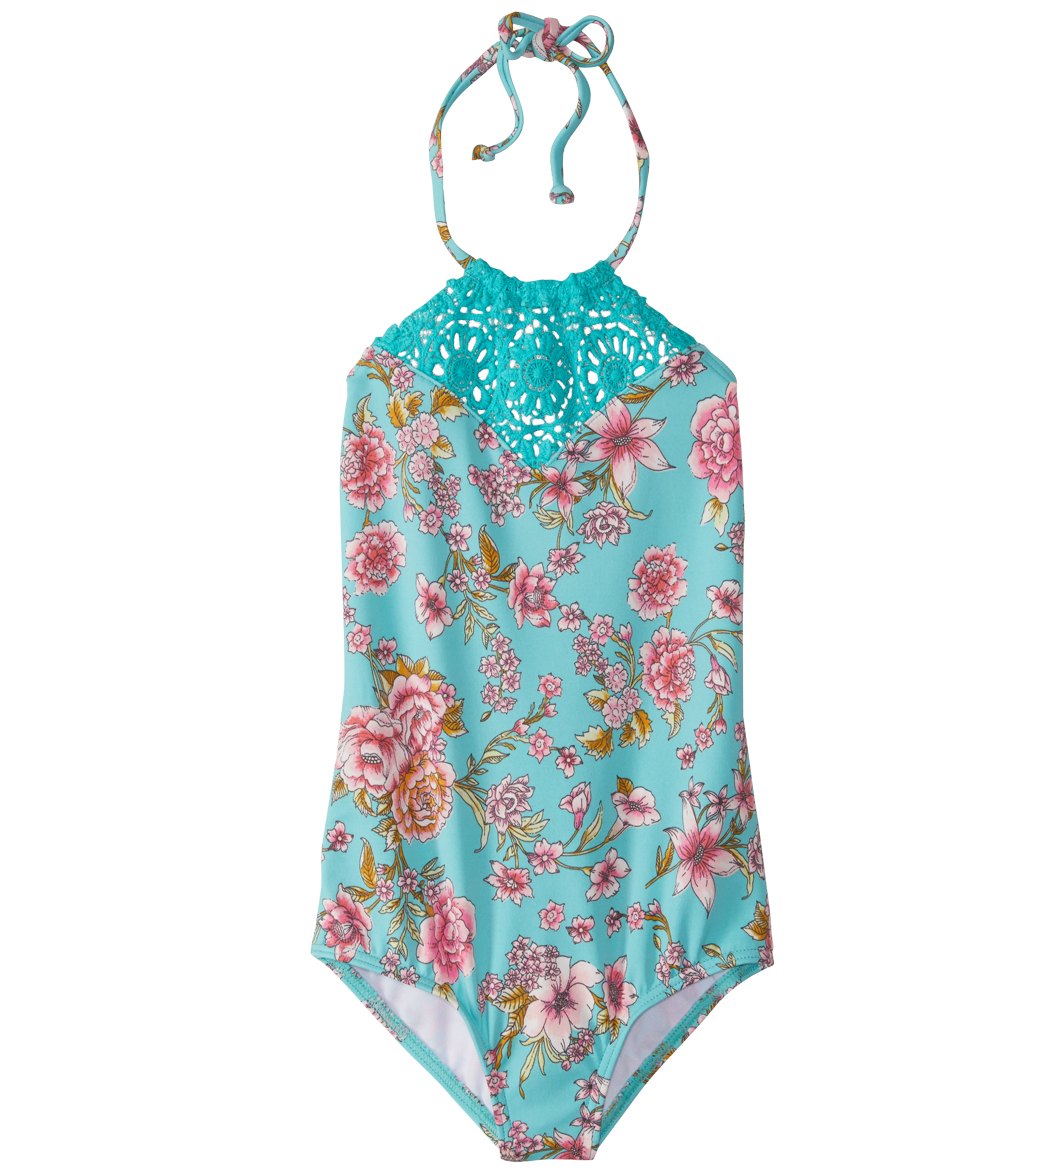 Billabong Girls' Blooming Beauty One Piece Swimsuit 4-14 - Tiki Turquoise 4 - Swimoutlet.com